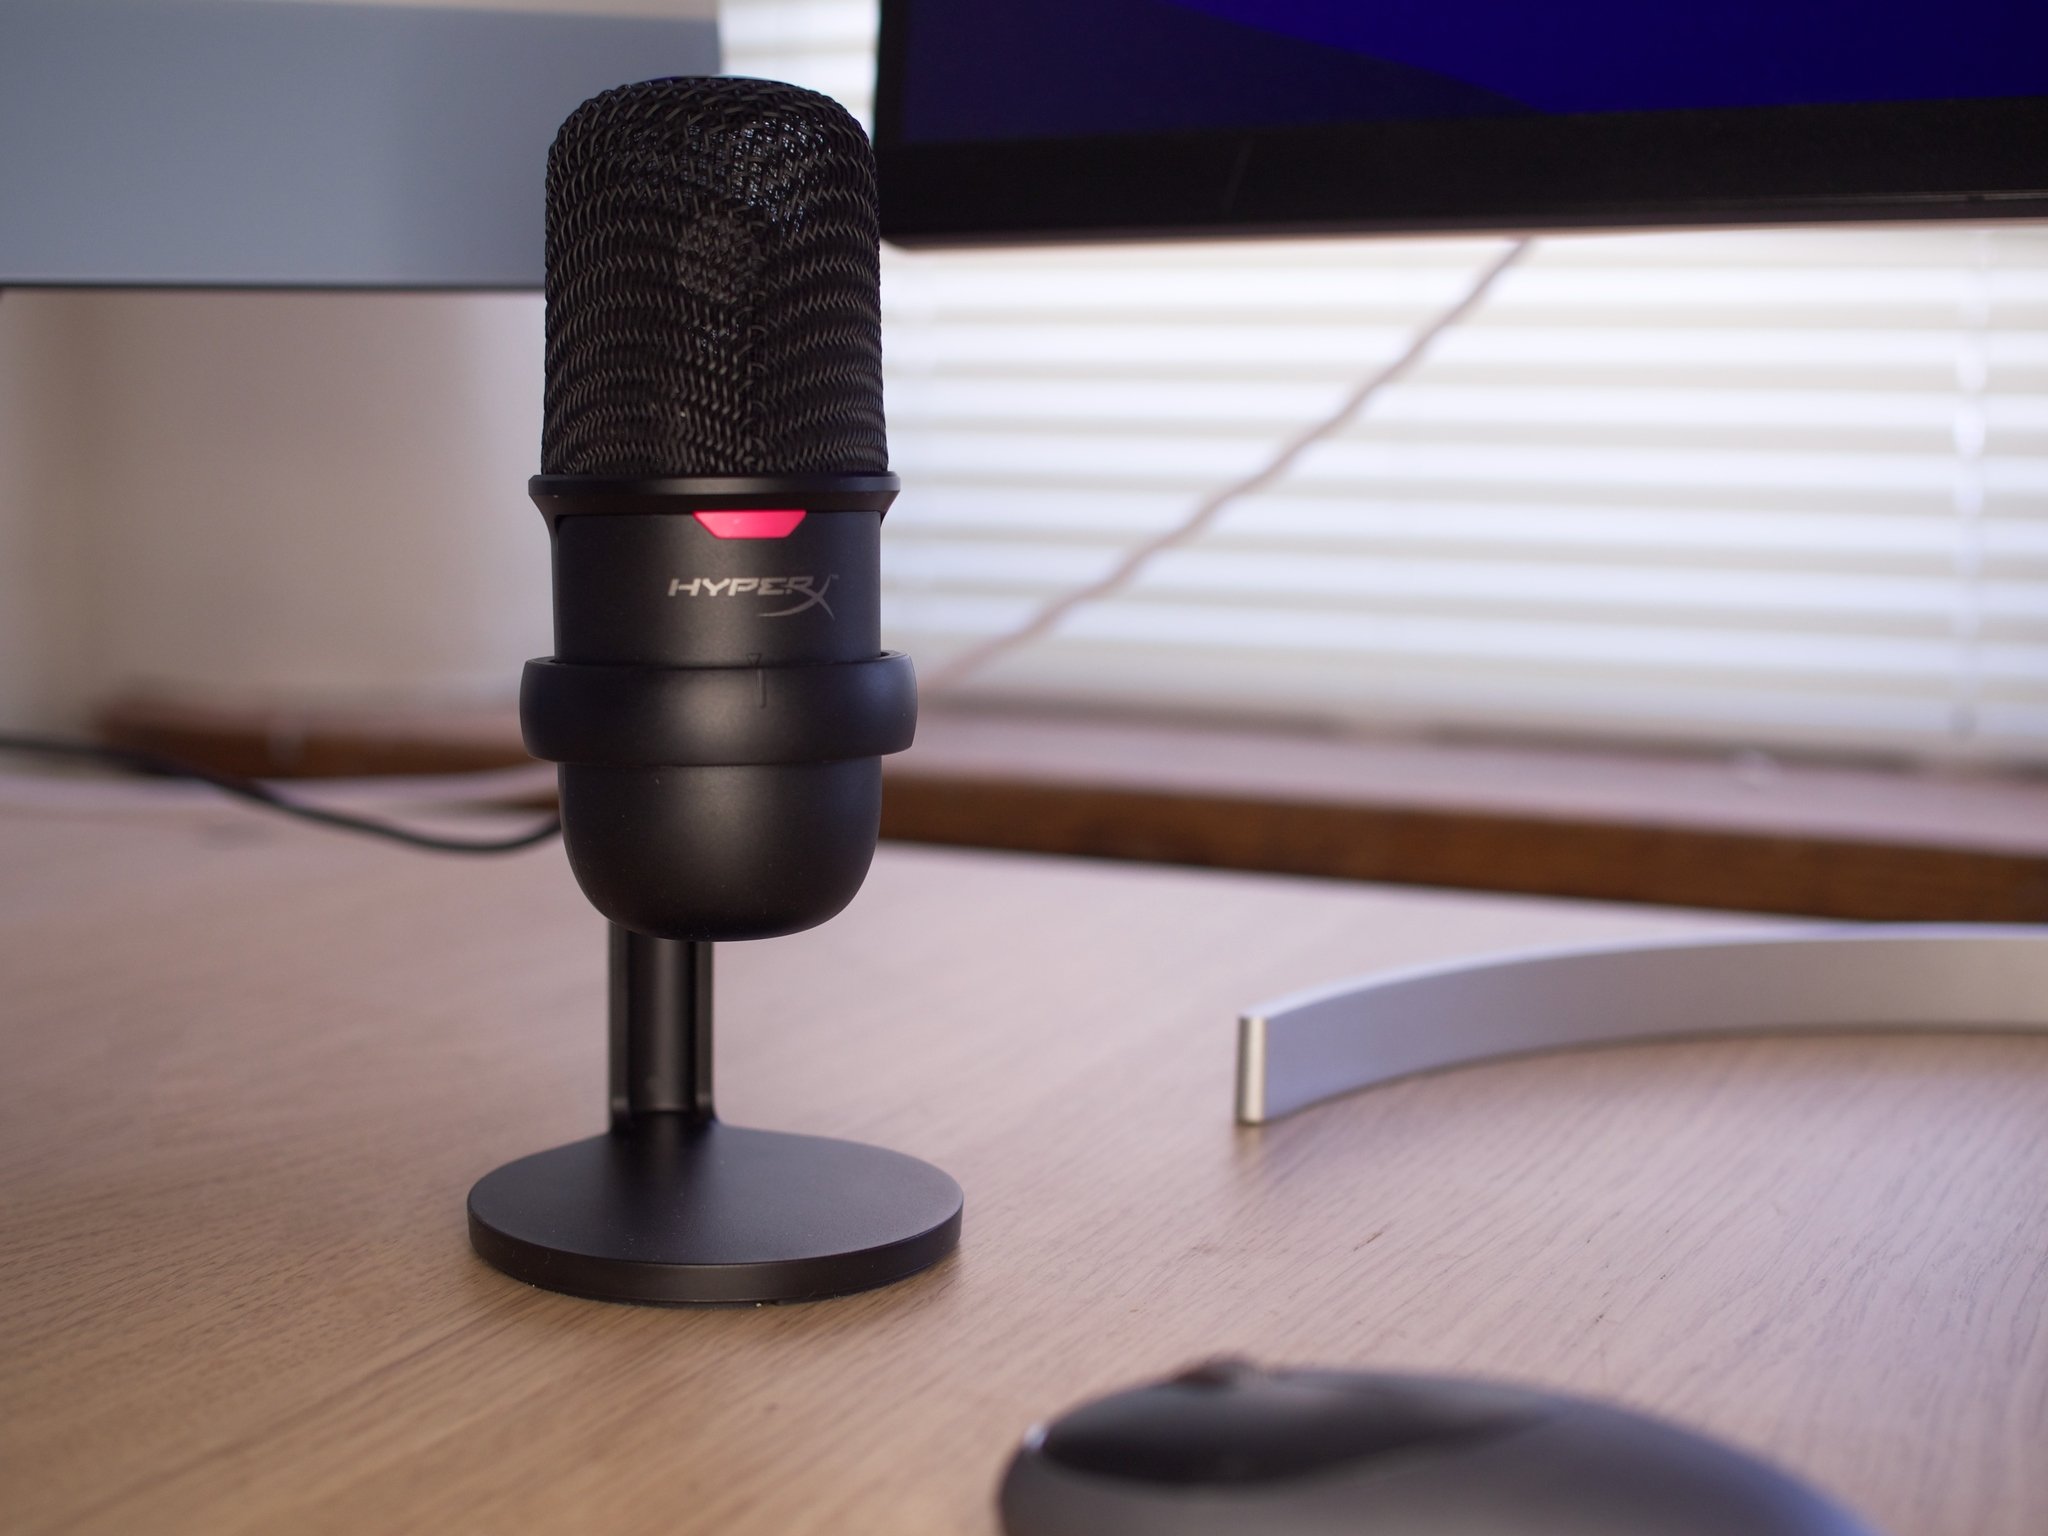 Create content with the HyperX SoloCast USB mic on sale for $40